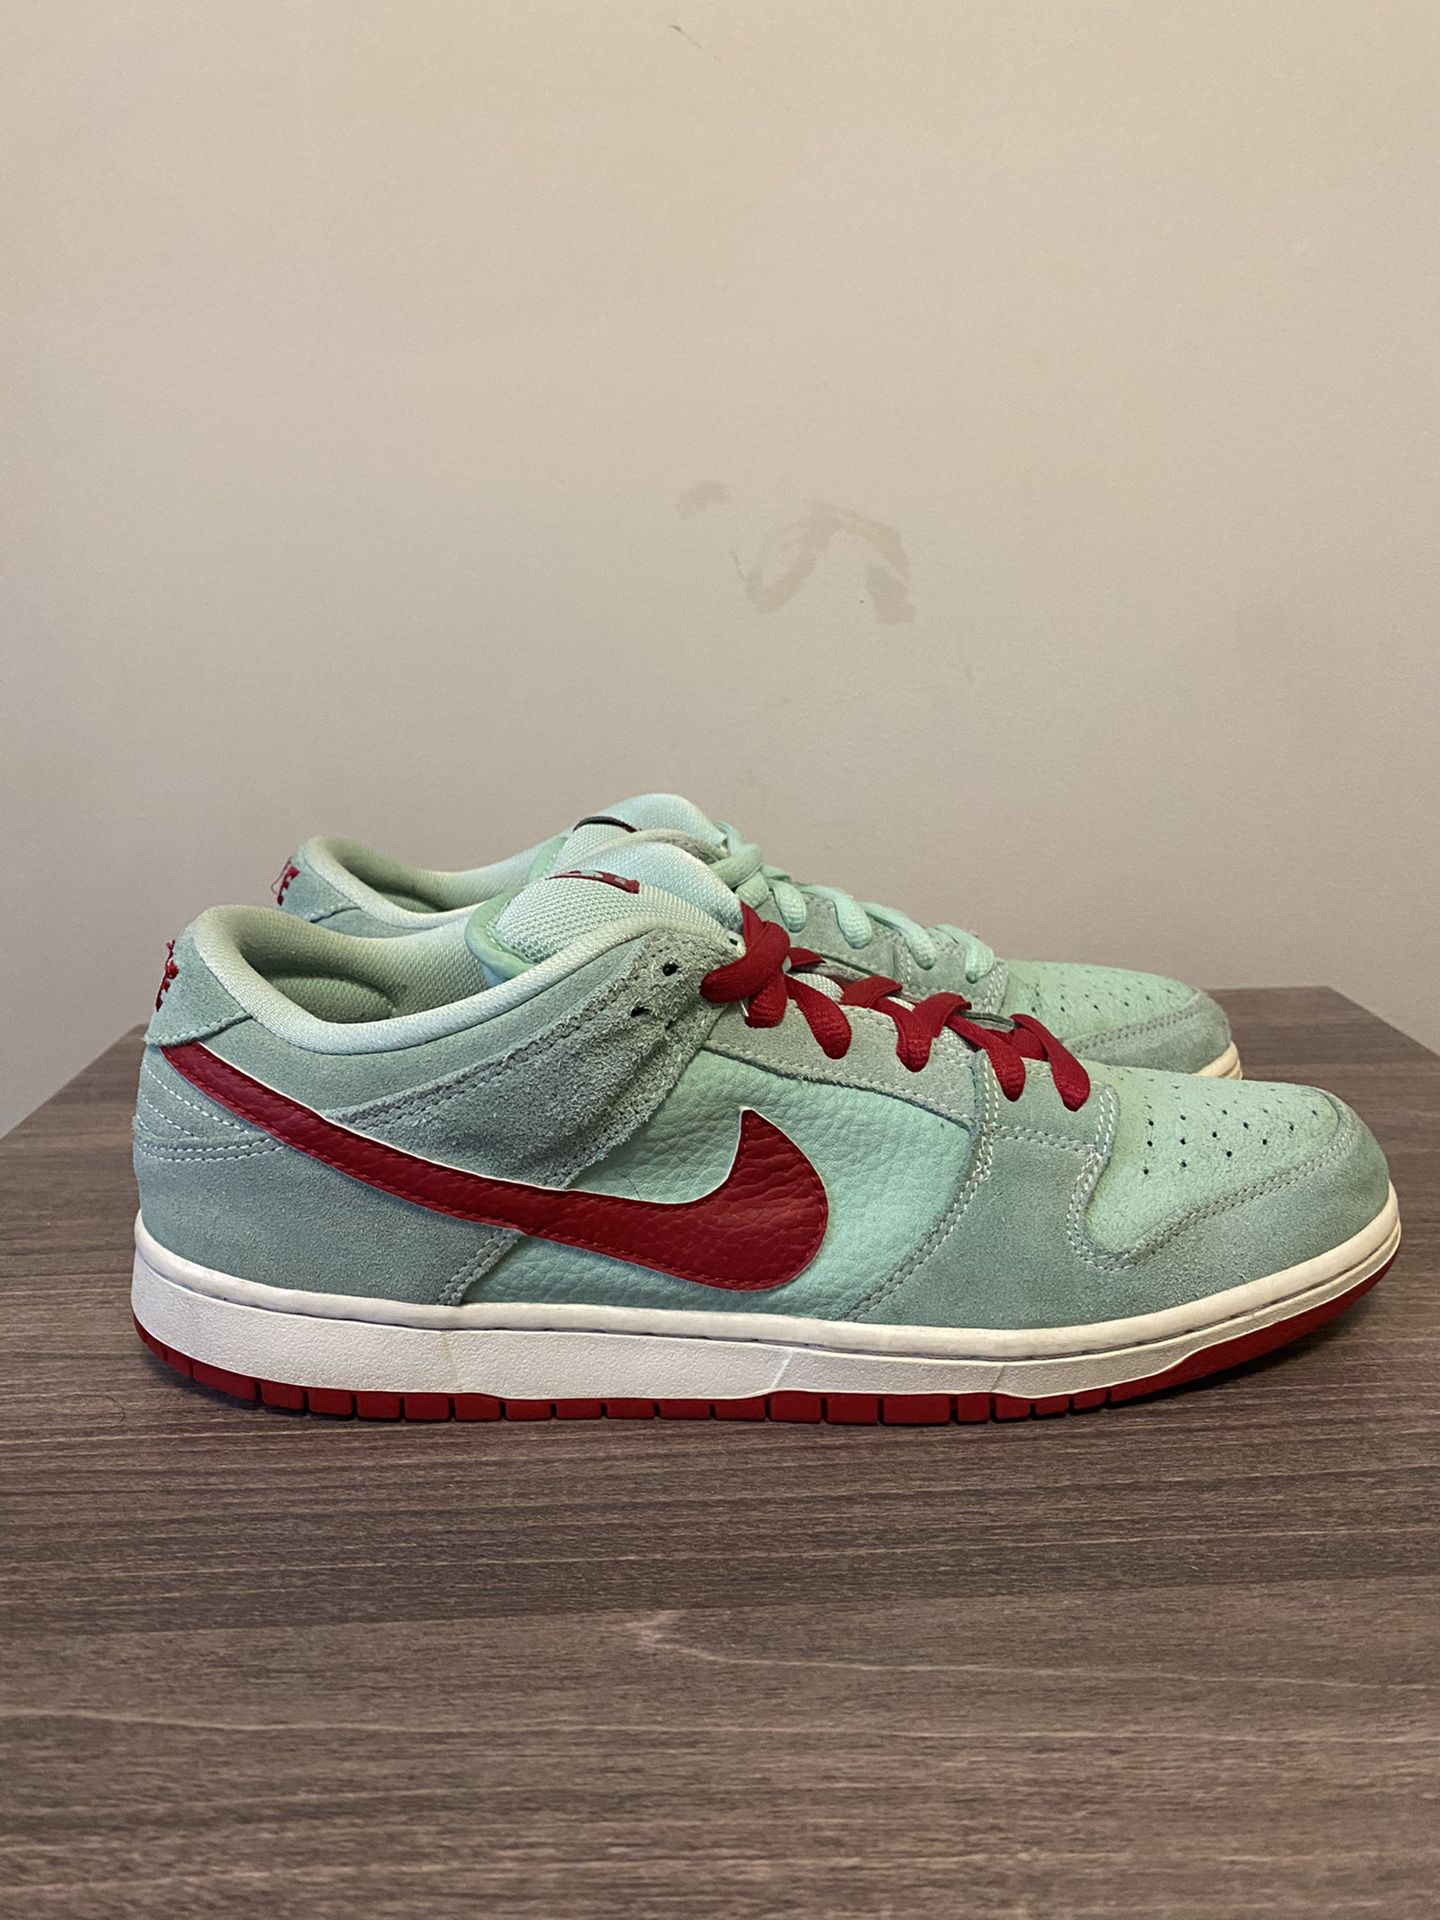 2012 NIKE SB DUNK LOW PRO MINT GYM RED SIZE 11